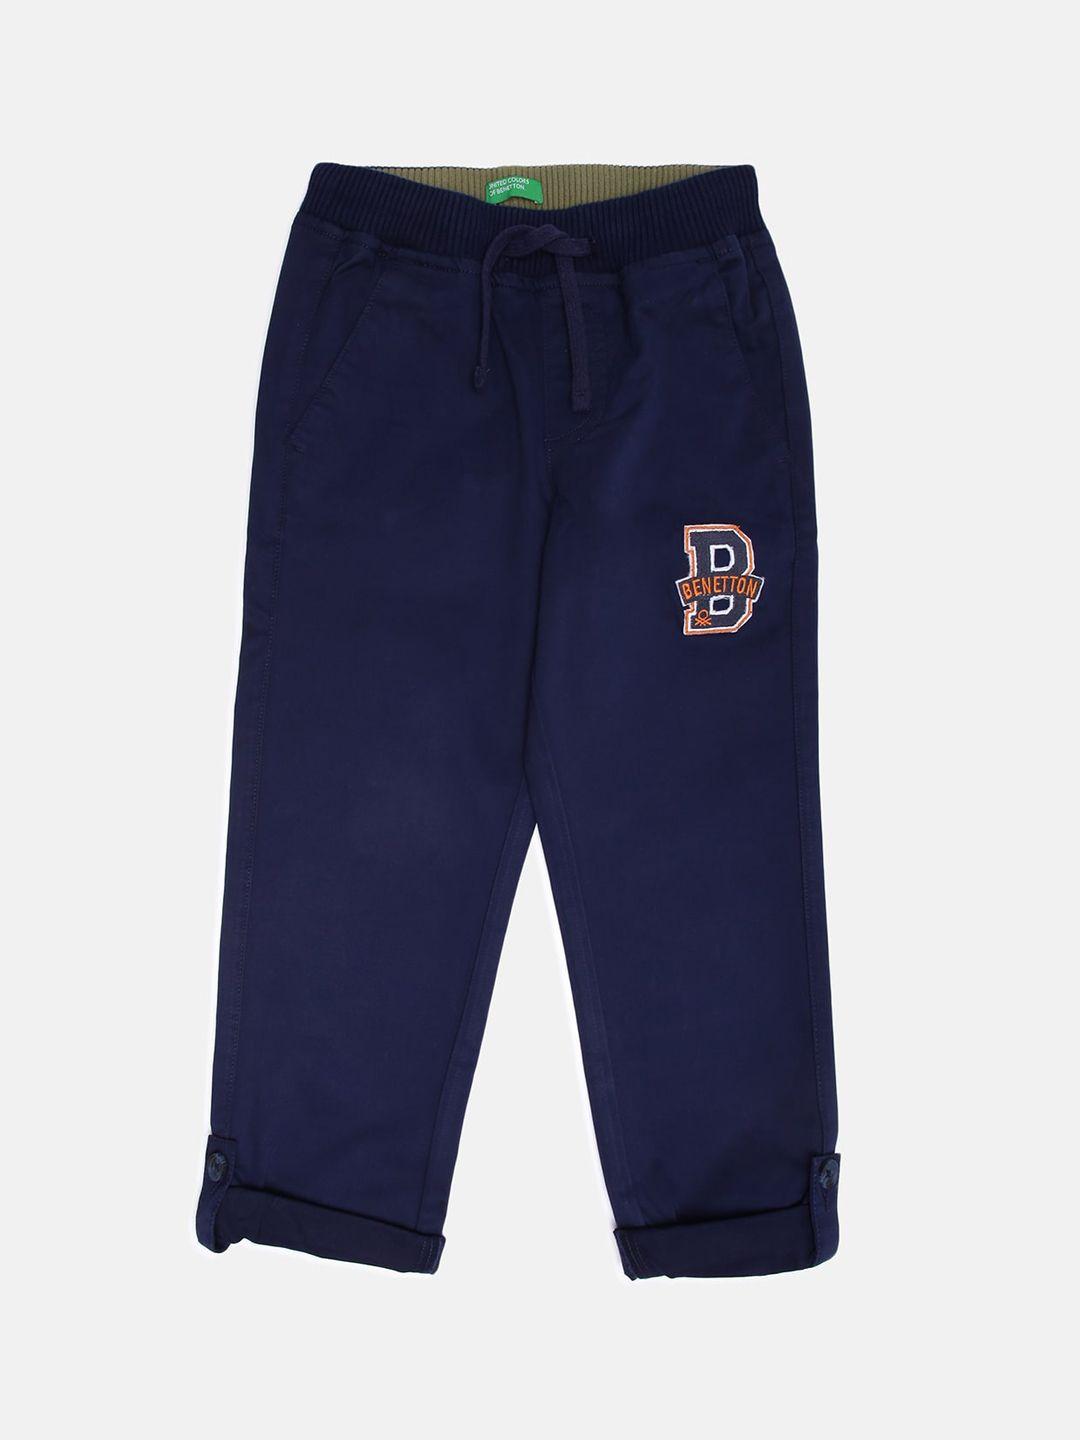 united-colors-of-benetton-boys-navy-blue-solid-trousers